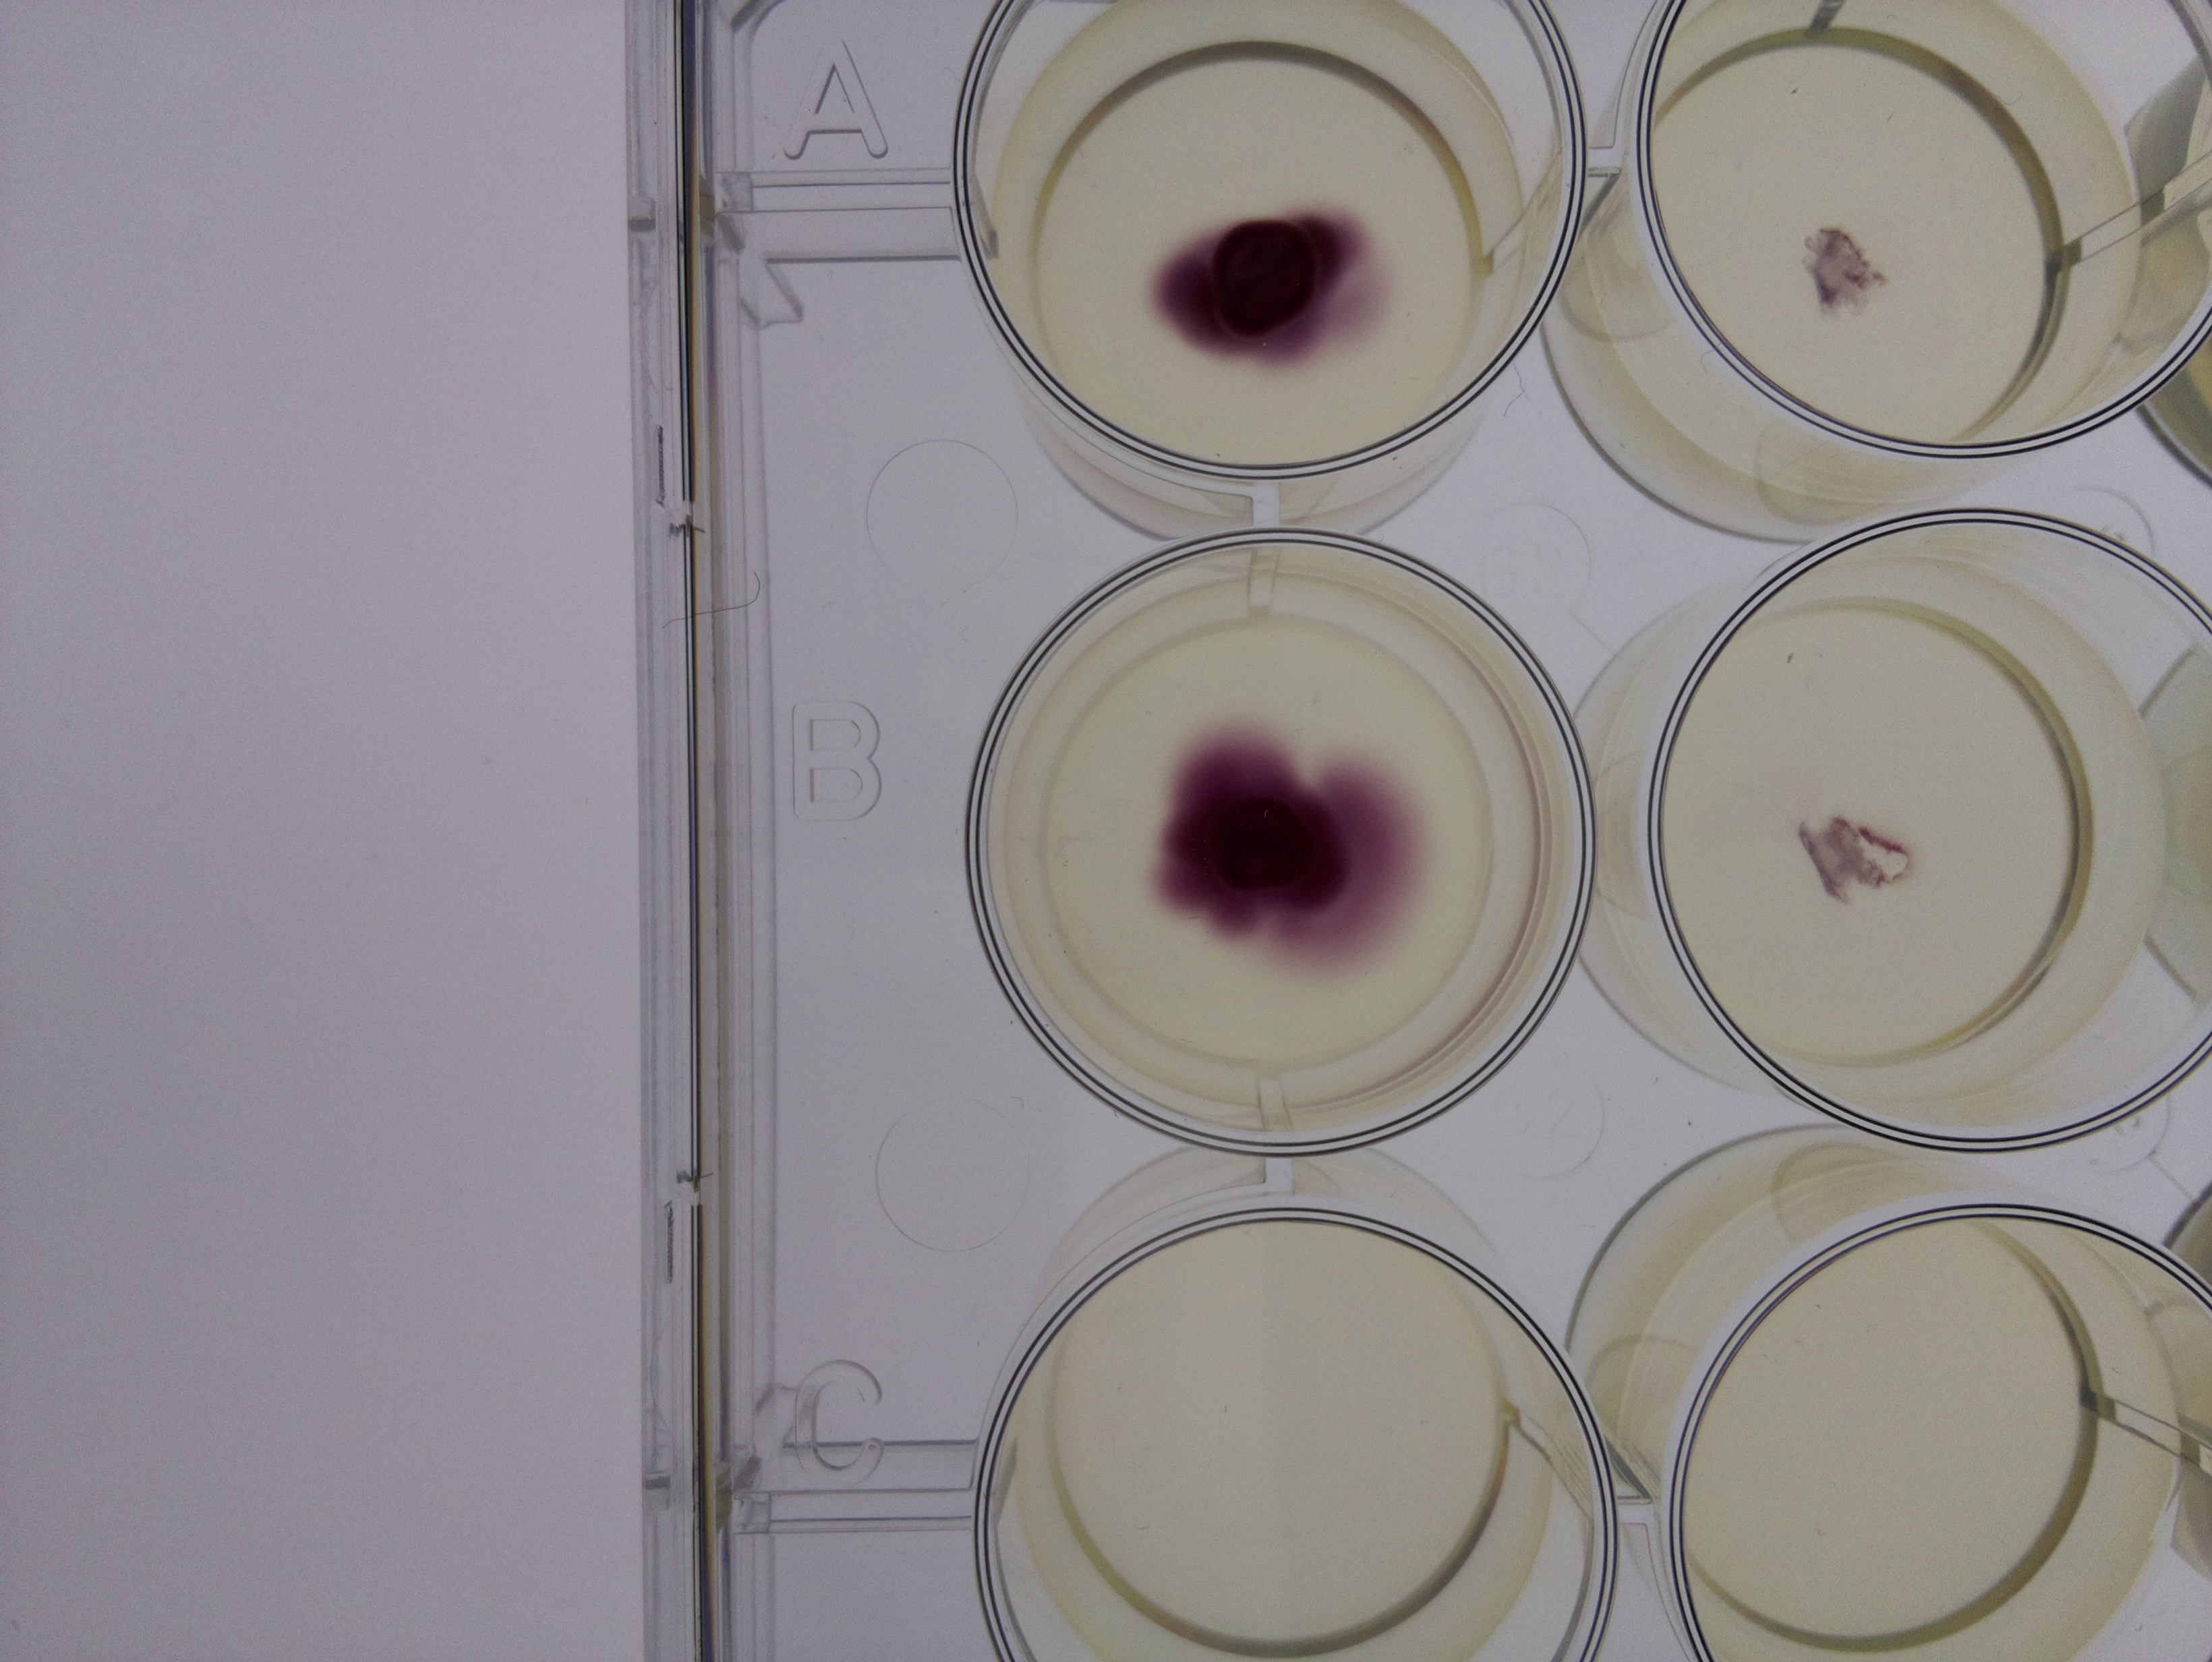 Timelapse of E. coli growth in soft agar captured using a Raspberry Pi Camera